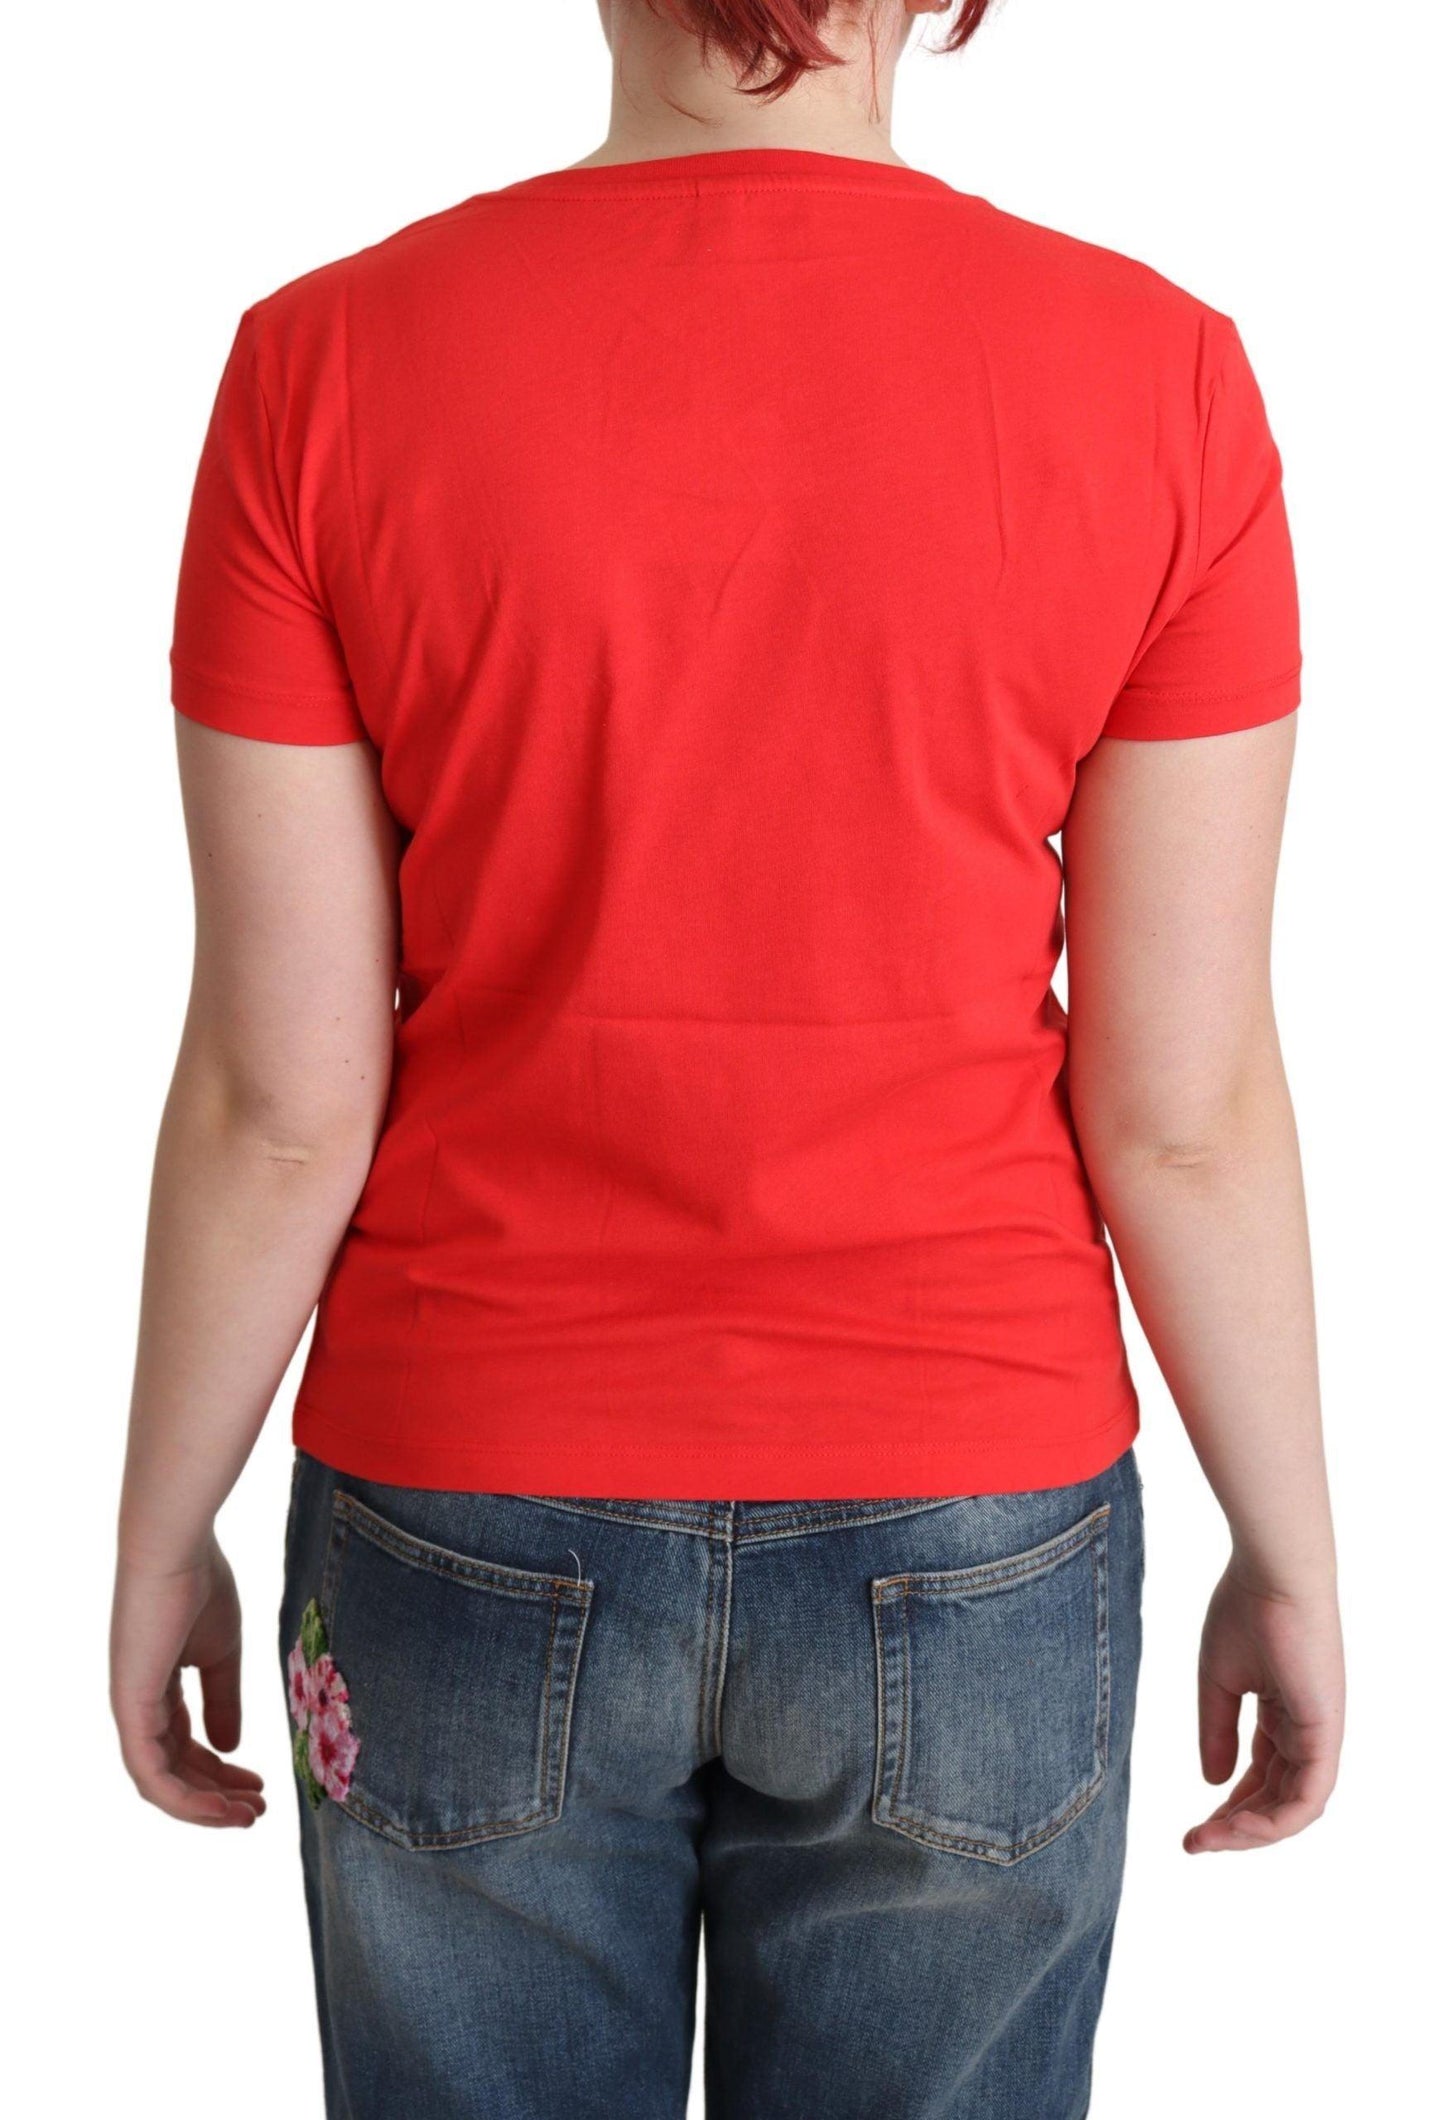 Moschino Chic Red Cotton Tee with Playful Print - PER.FASHION